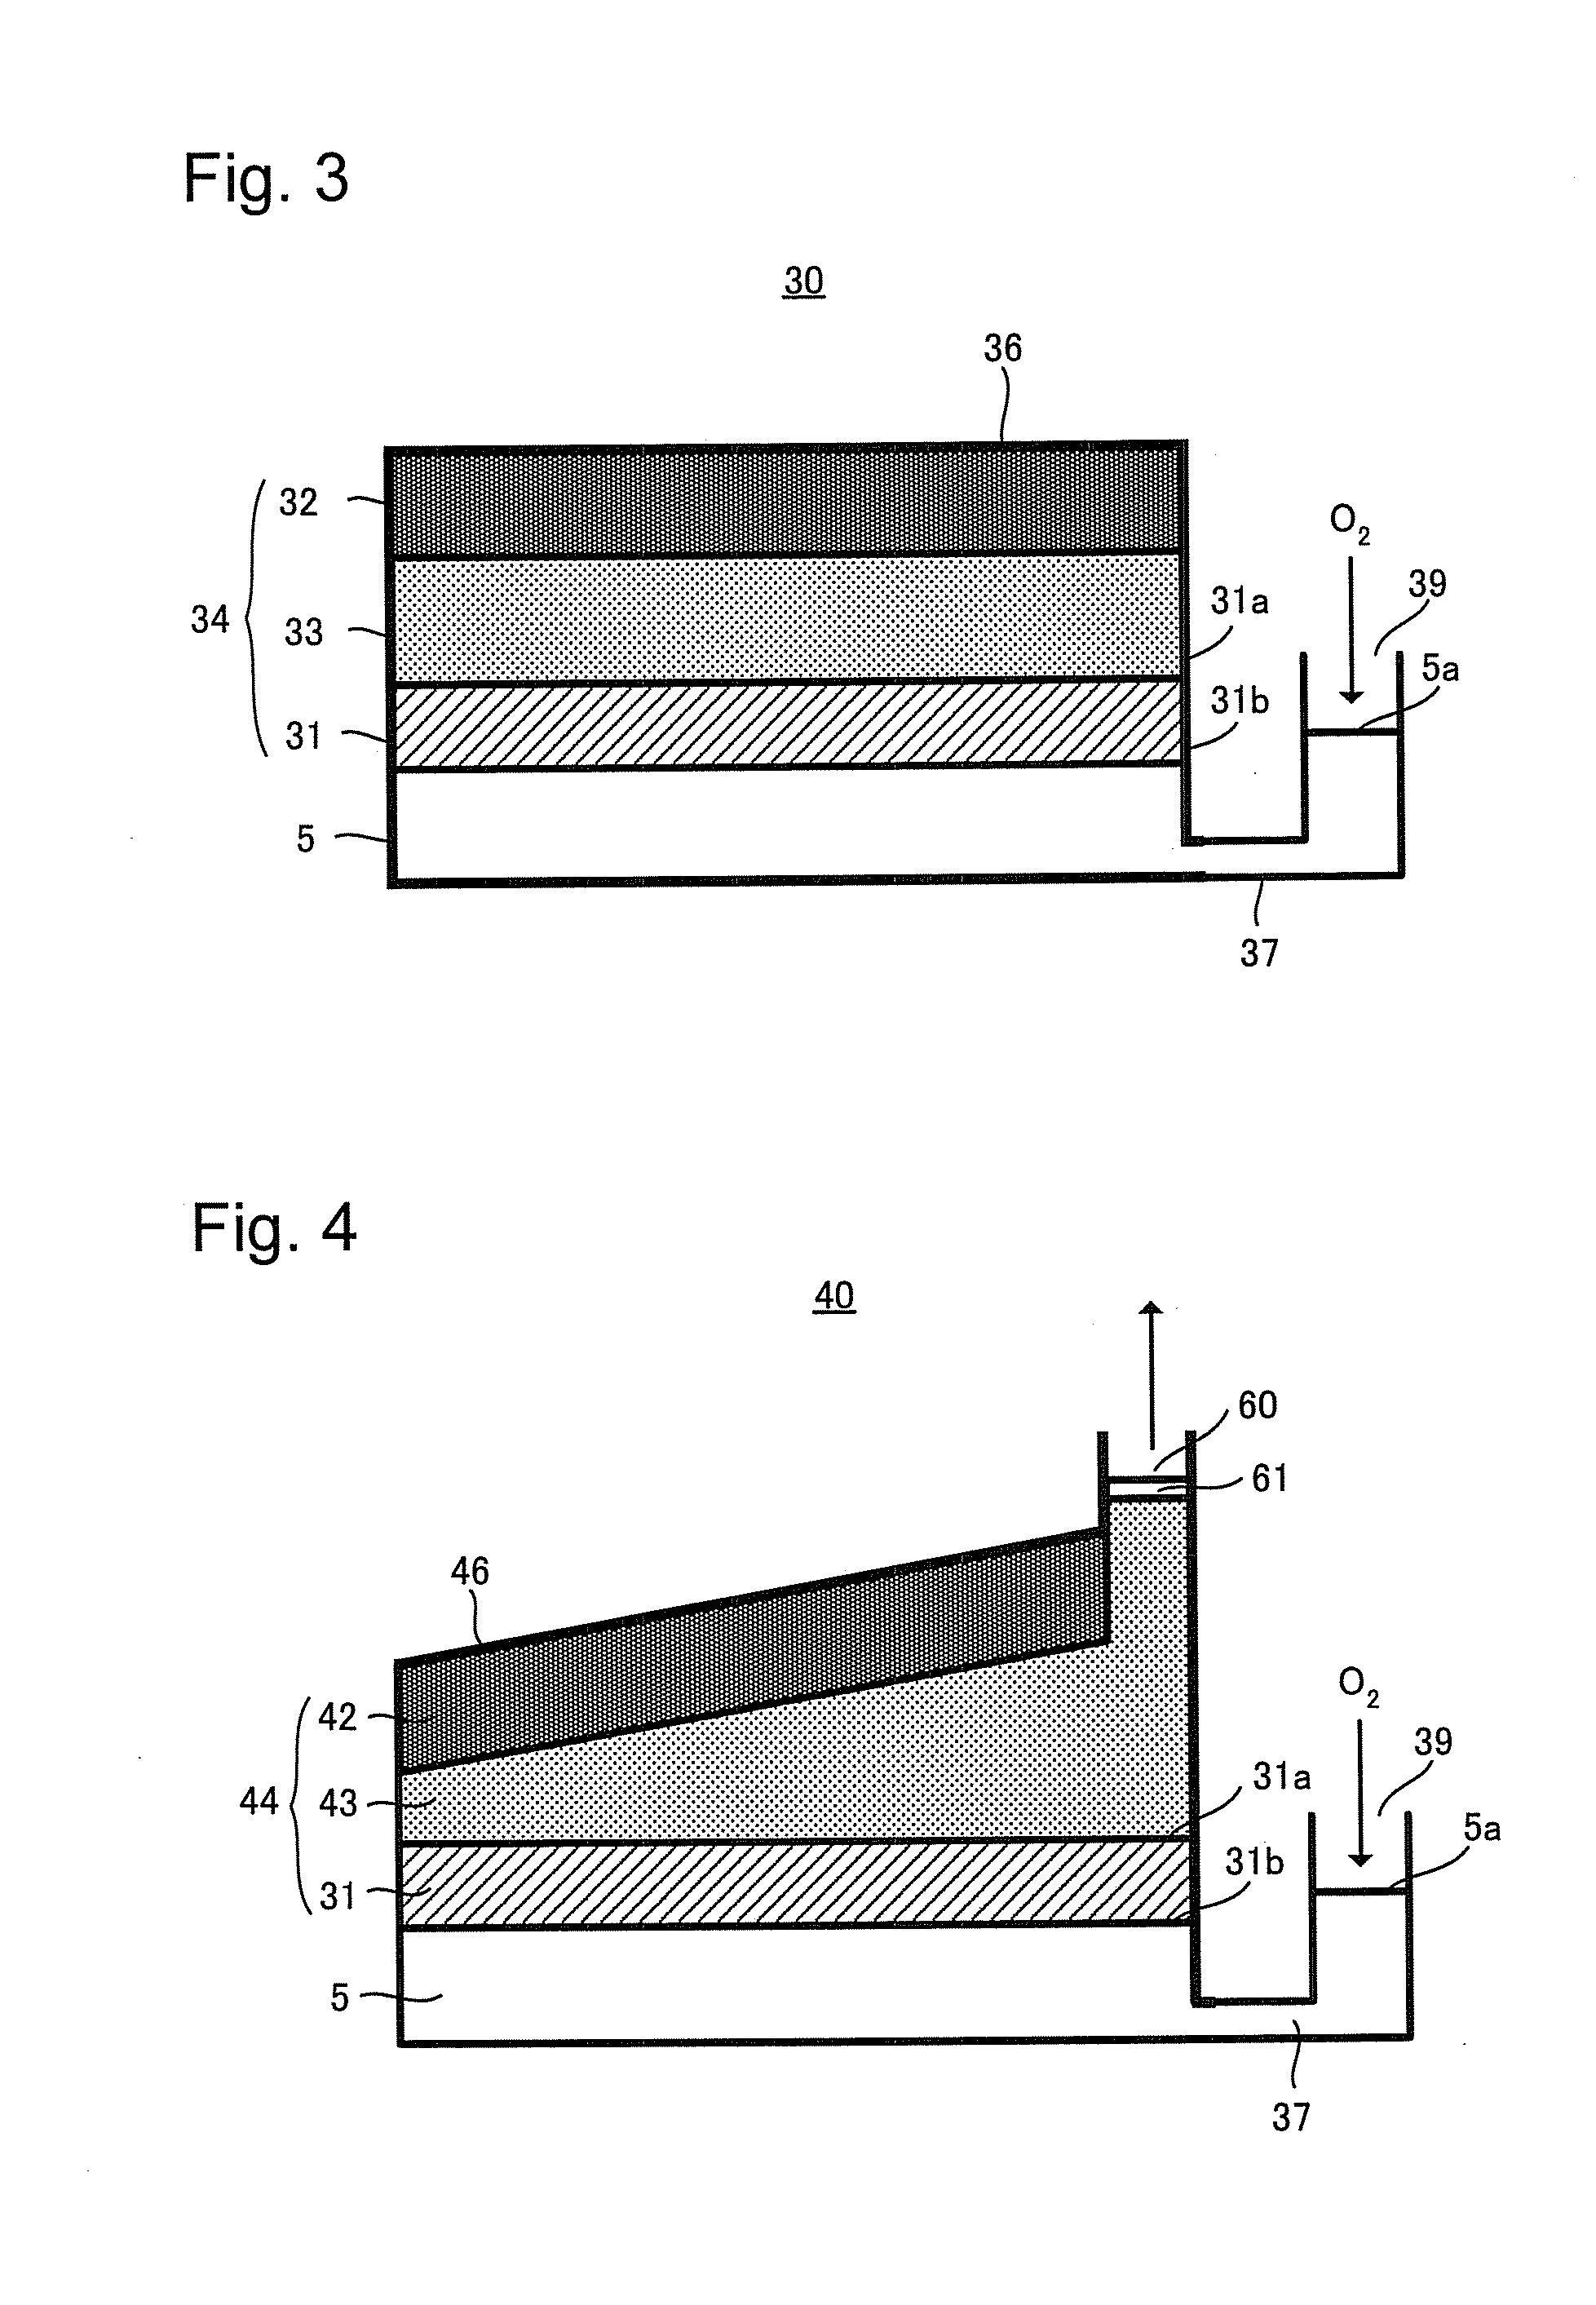 Air battery including oxygen-containing solvent